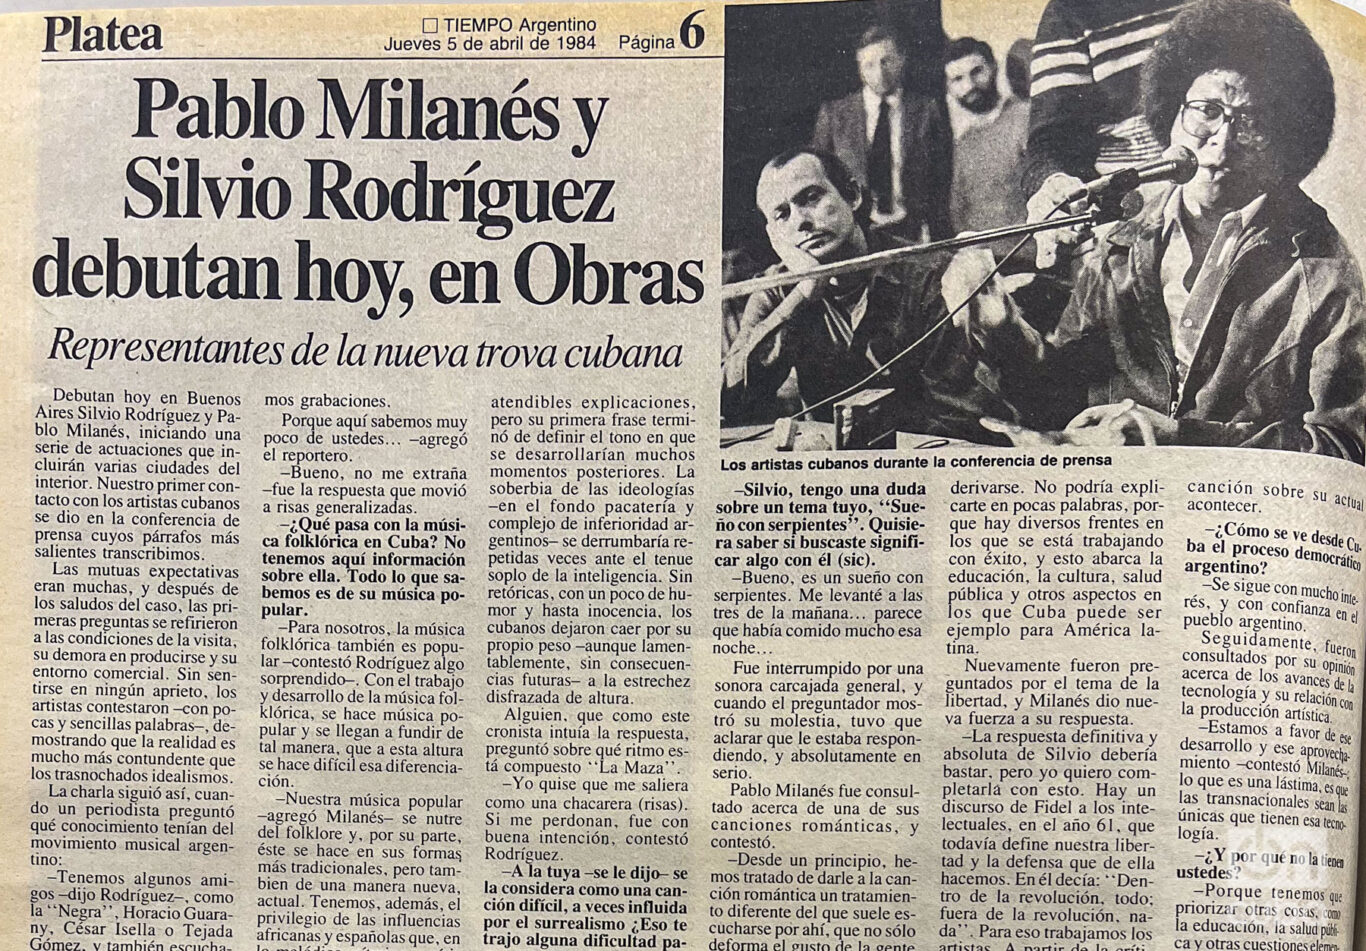 Page dedicated by the newspaper Tiempo Argentino to the press conference offered by Silvio and Pablo.